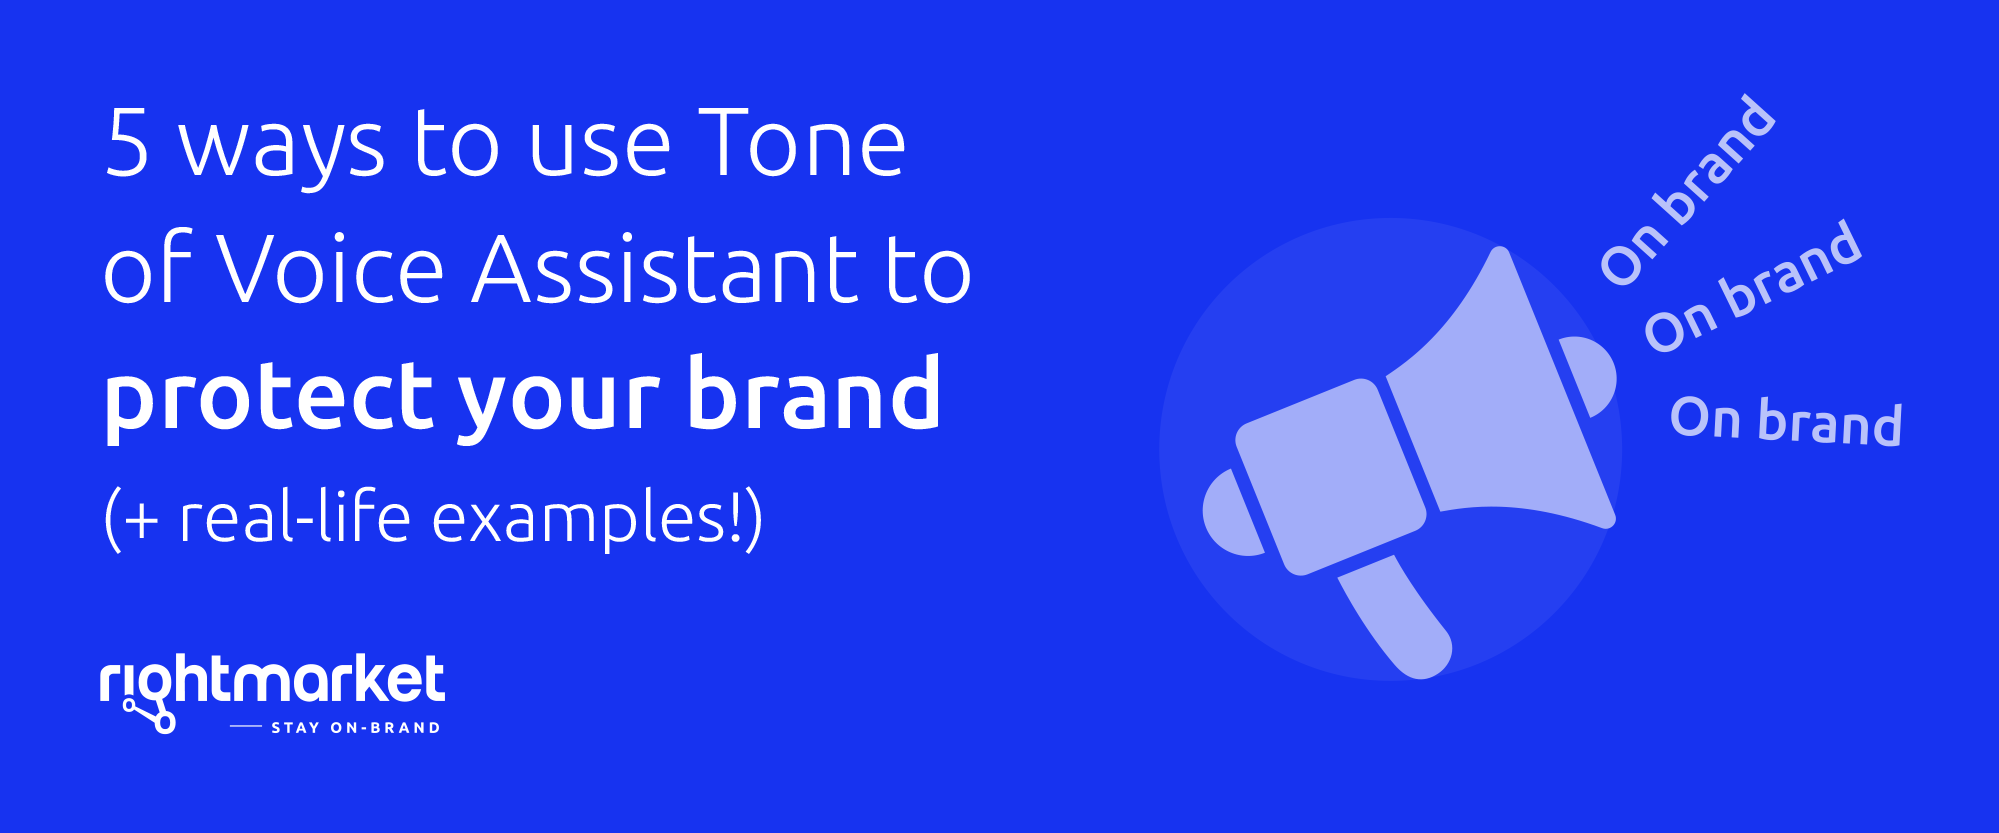 5 ways to use Tone of Voice Assistant to protect your brand (+ real-life examples!)